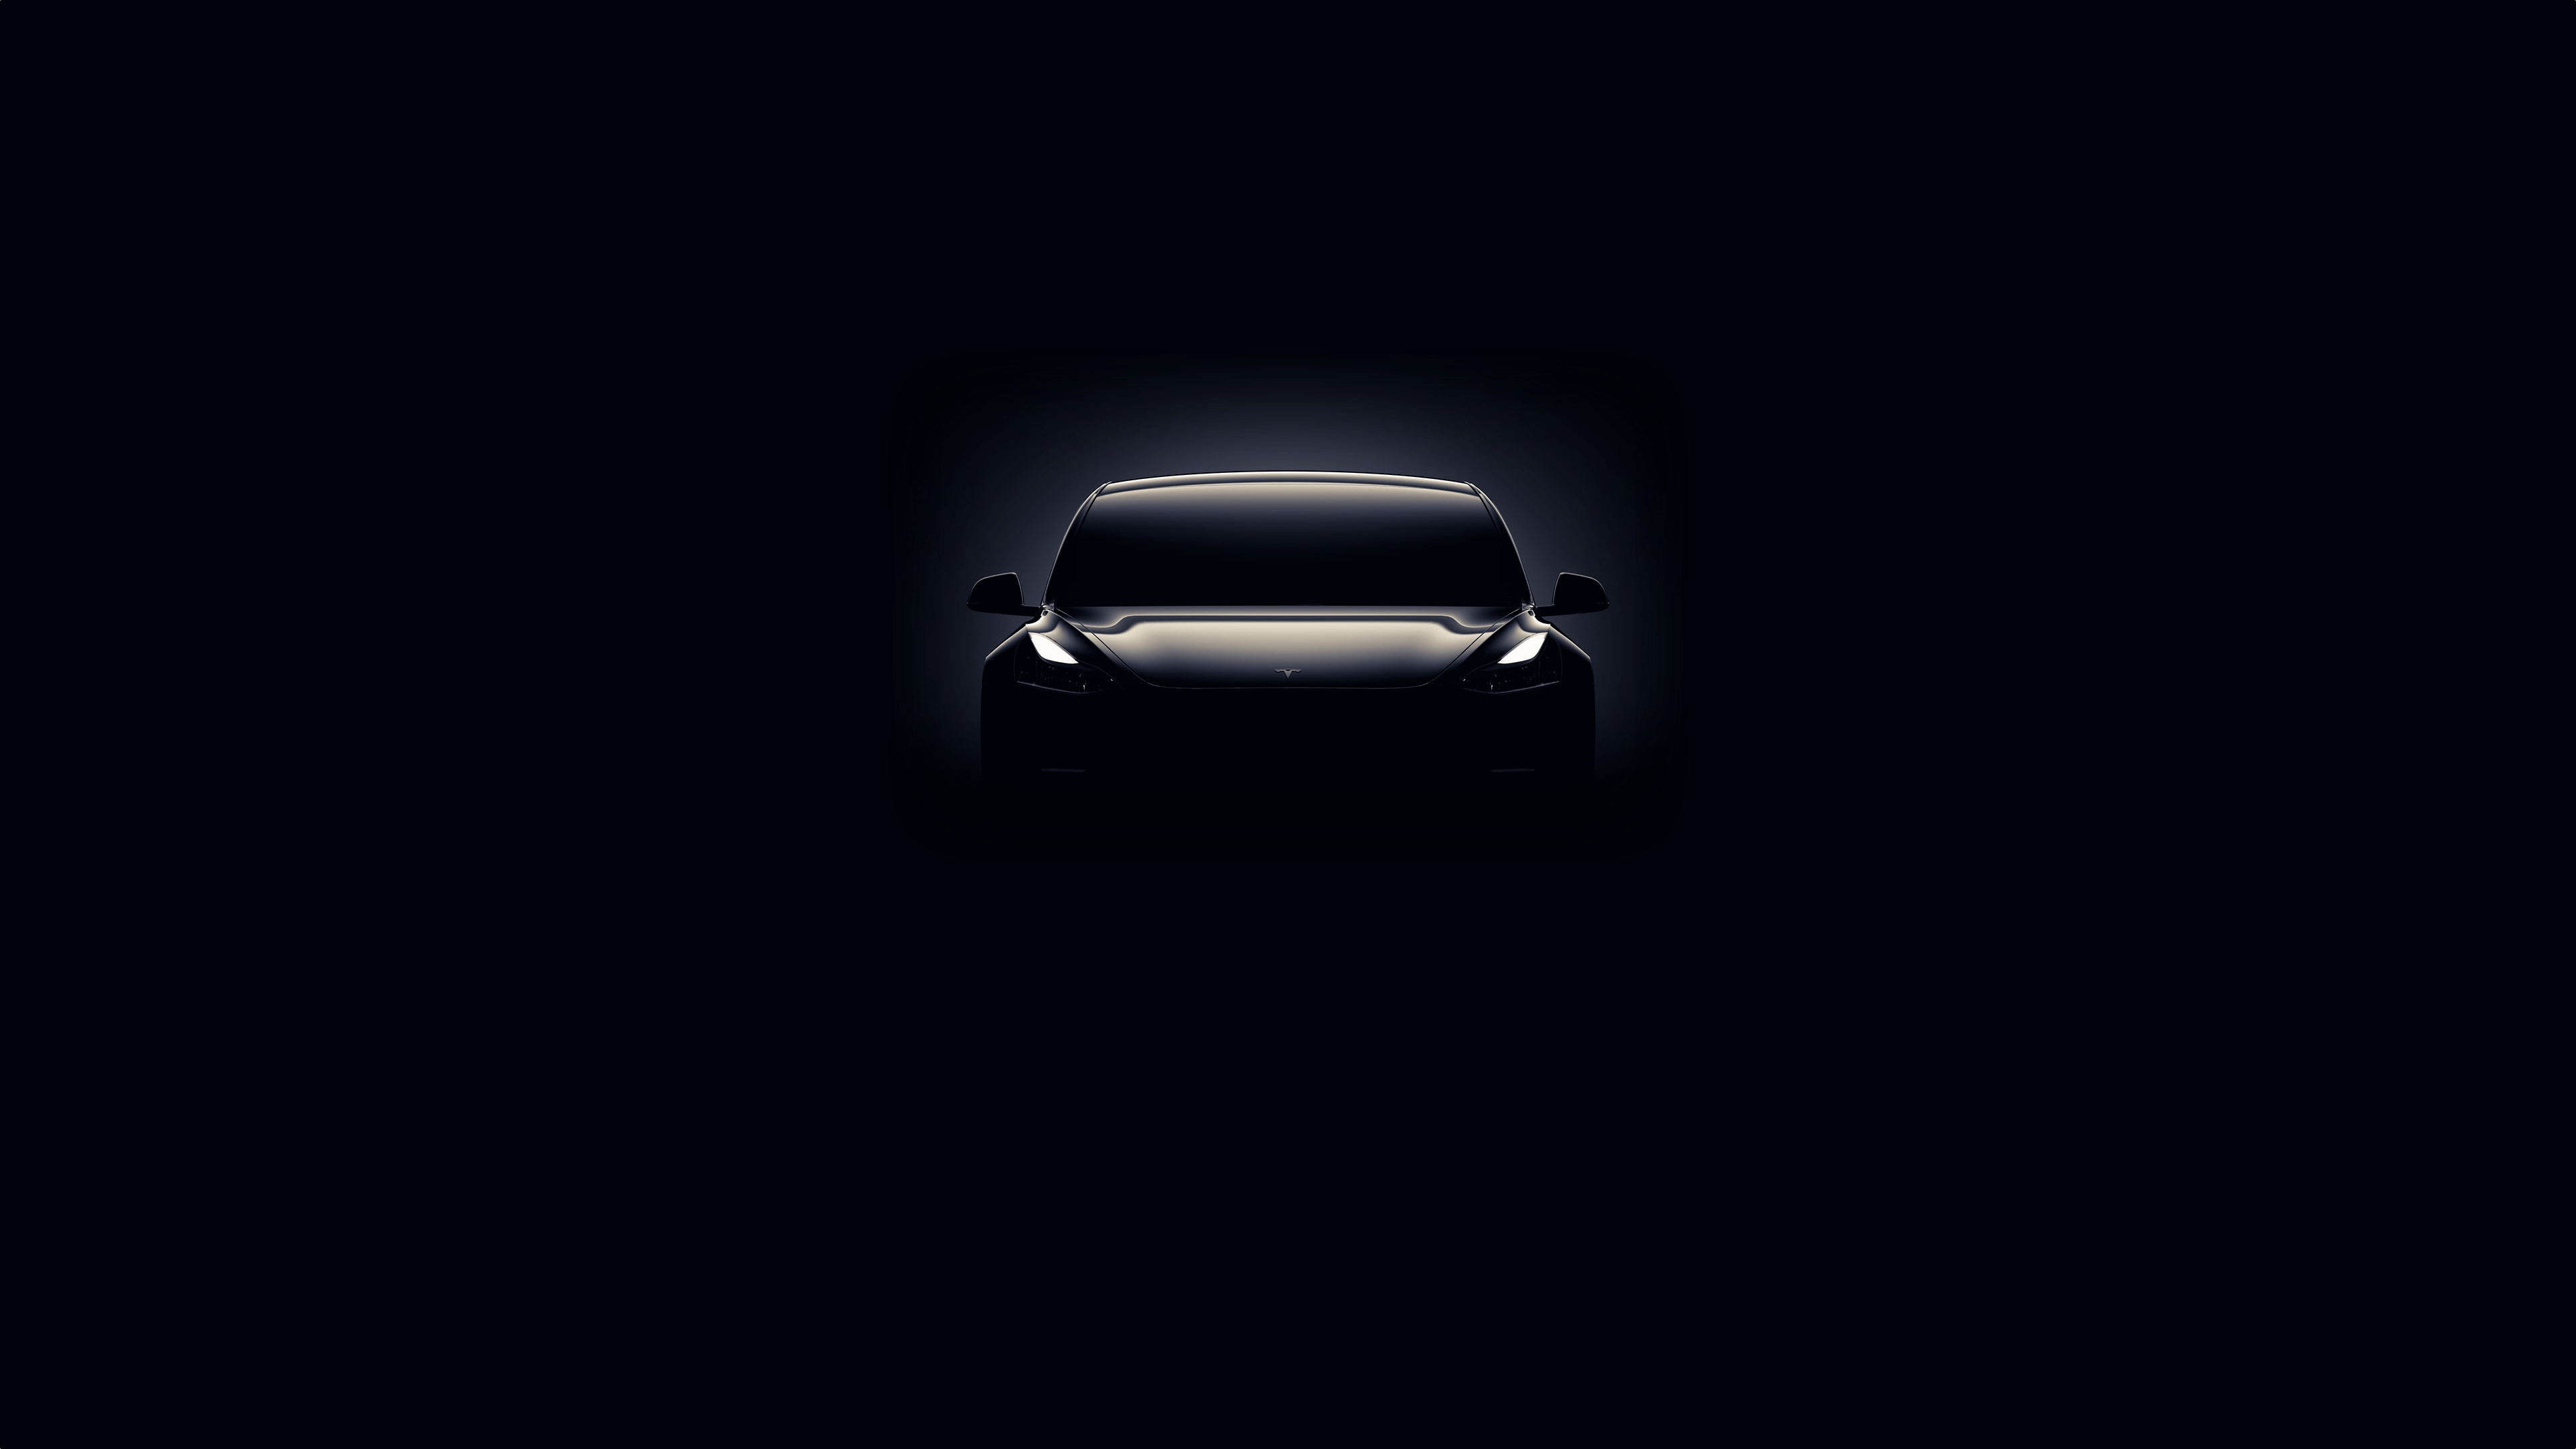 Created a desktop wallpaper from the Model 3 invite email